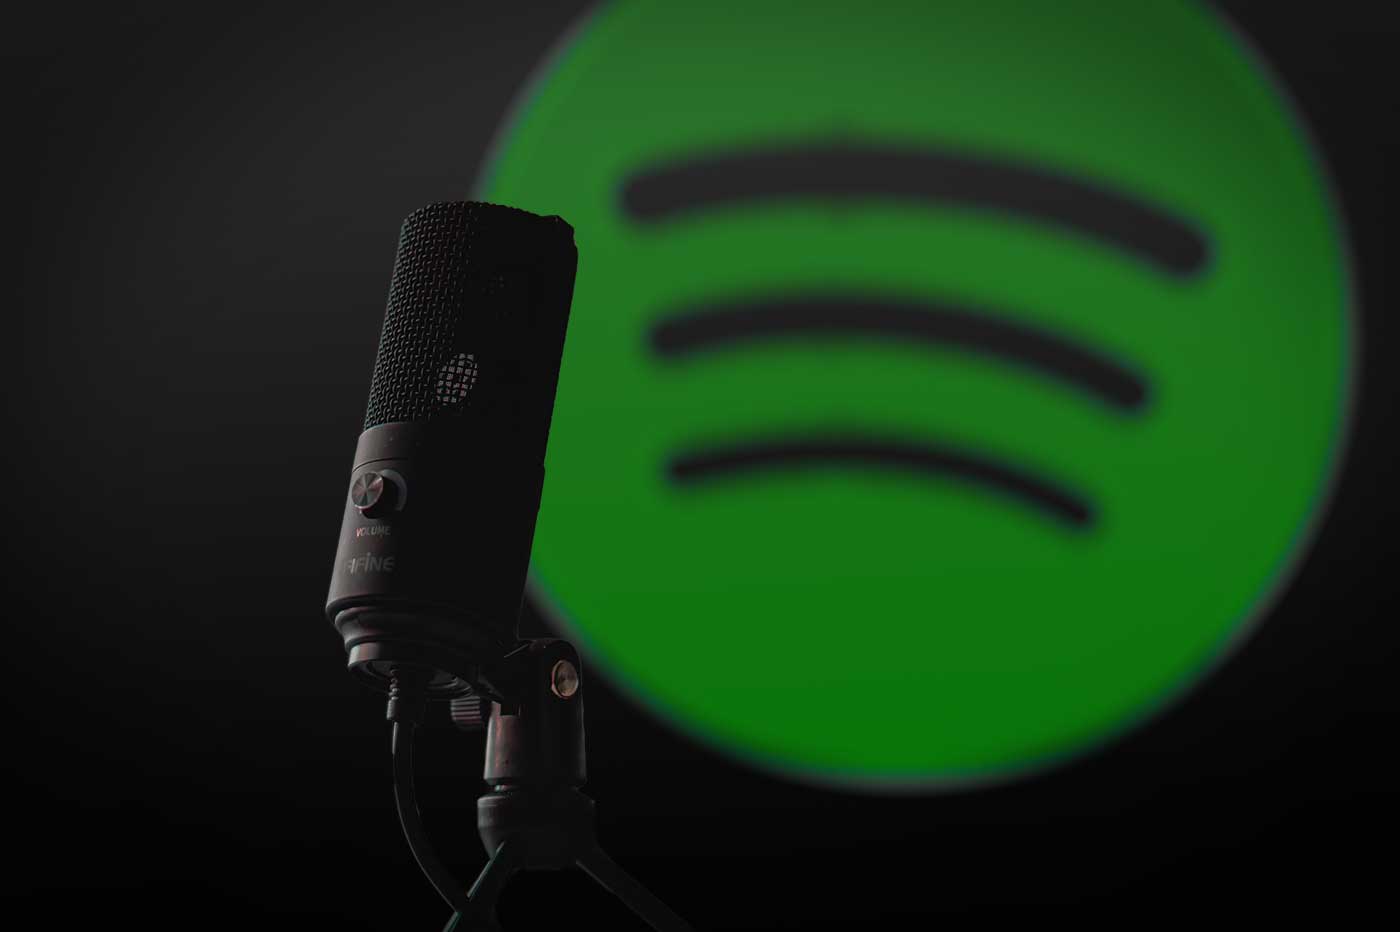 How To Upload A Podcast To Spotify